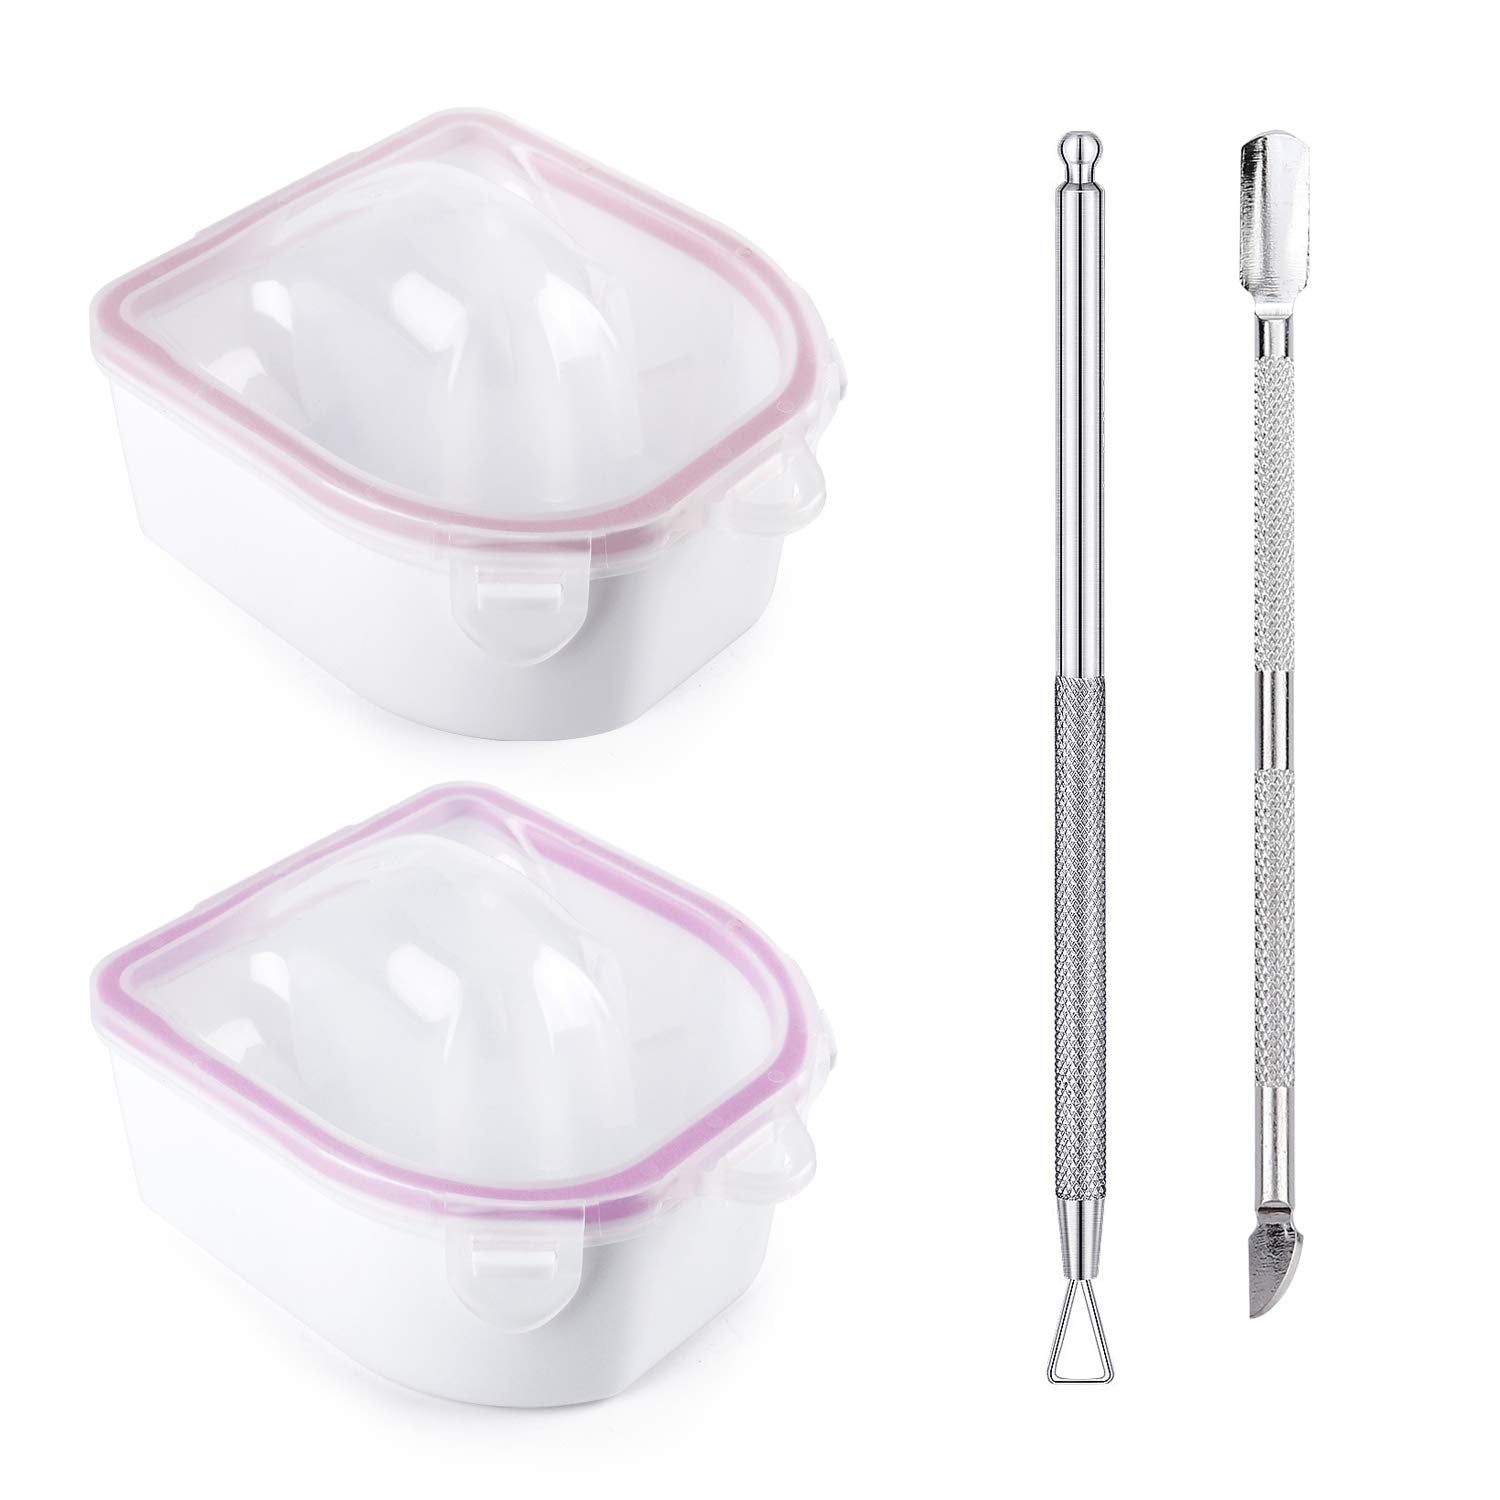 Nail Soaking Bowl, 2PCS Soak Off Gel Polish Dip Powder Remover Manicure Bowl with Triangle Cuticle Peeler and Stainless Steel Cuticle Pusher Nail Art Tool